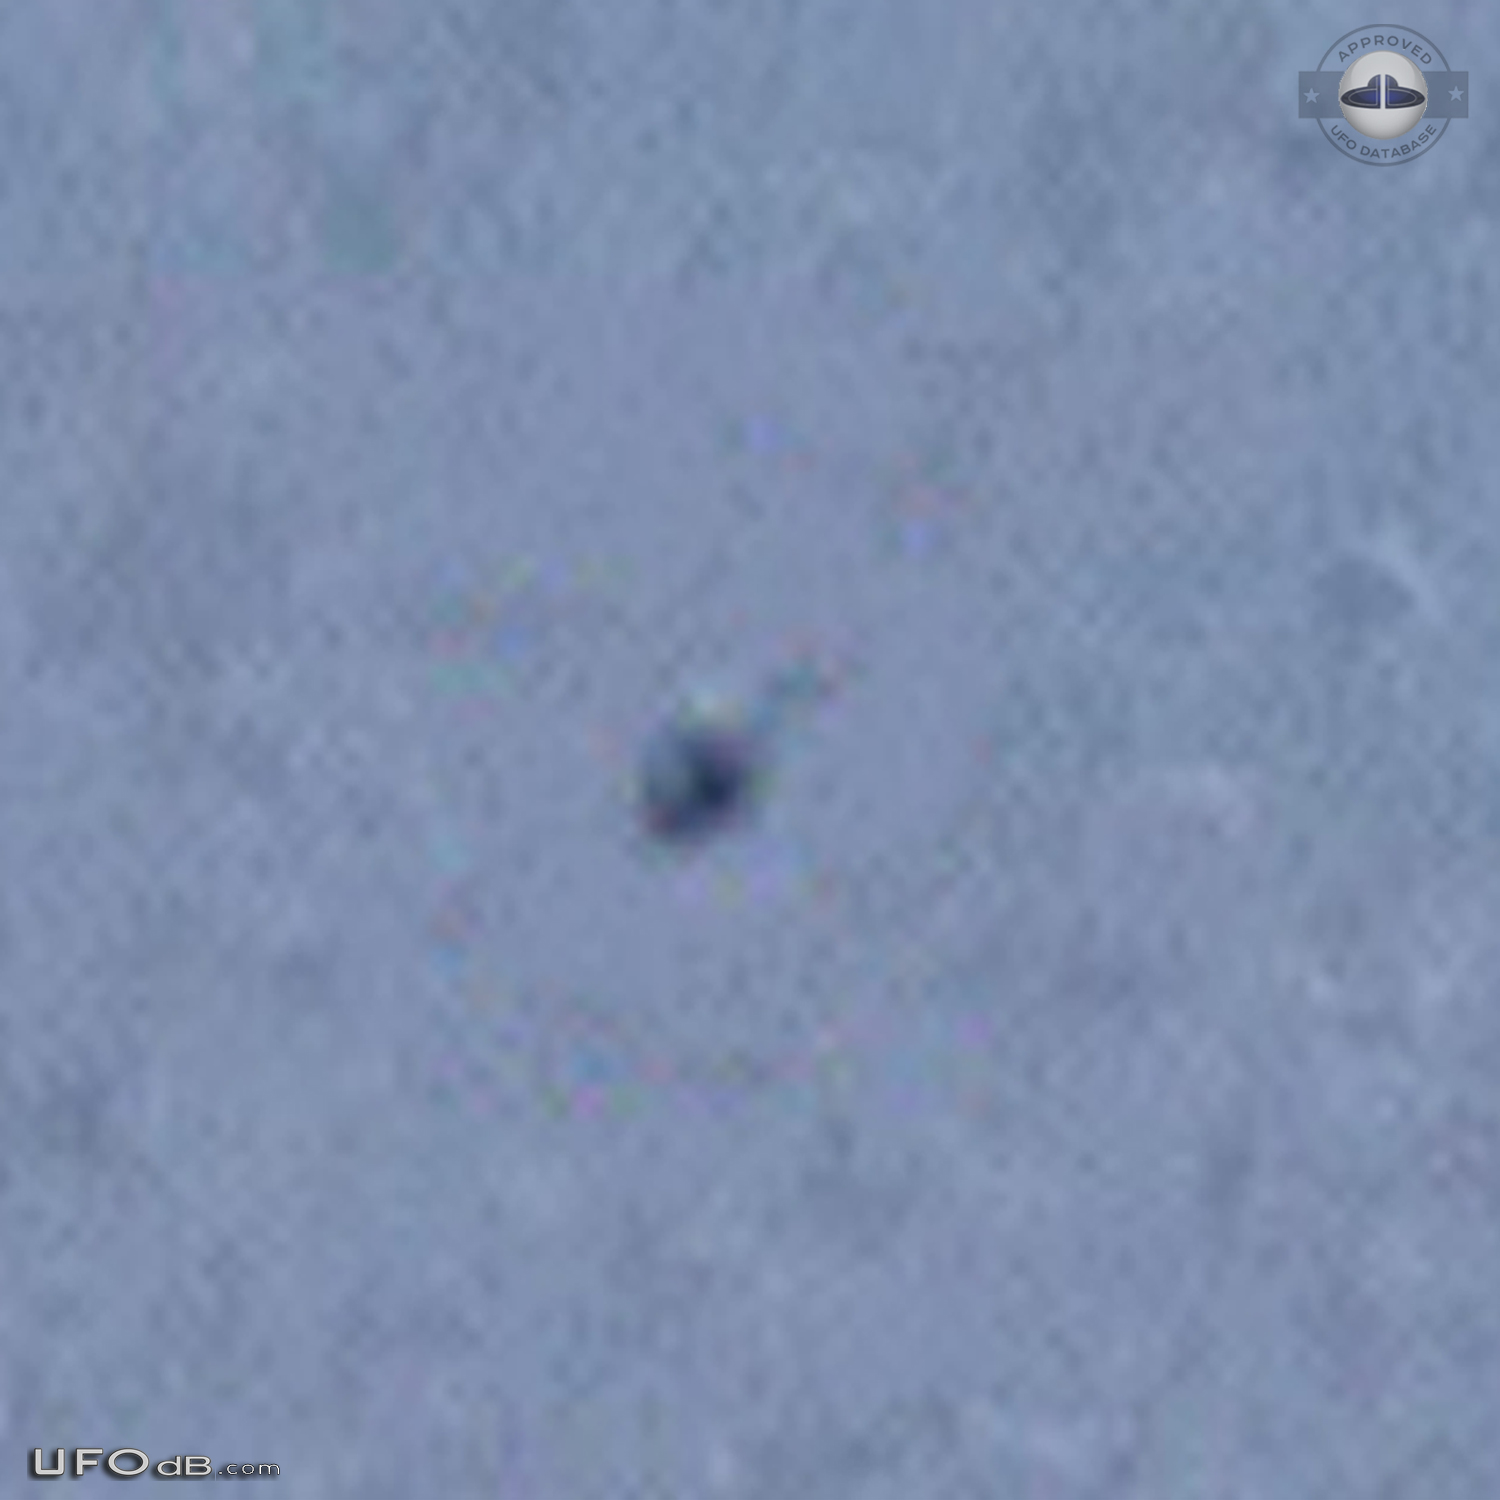 Out on a dog walk, ufo spotted for 15 minutes before it went upward UFO Picture #696-2